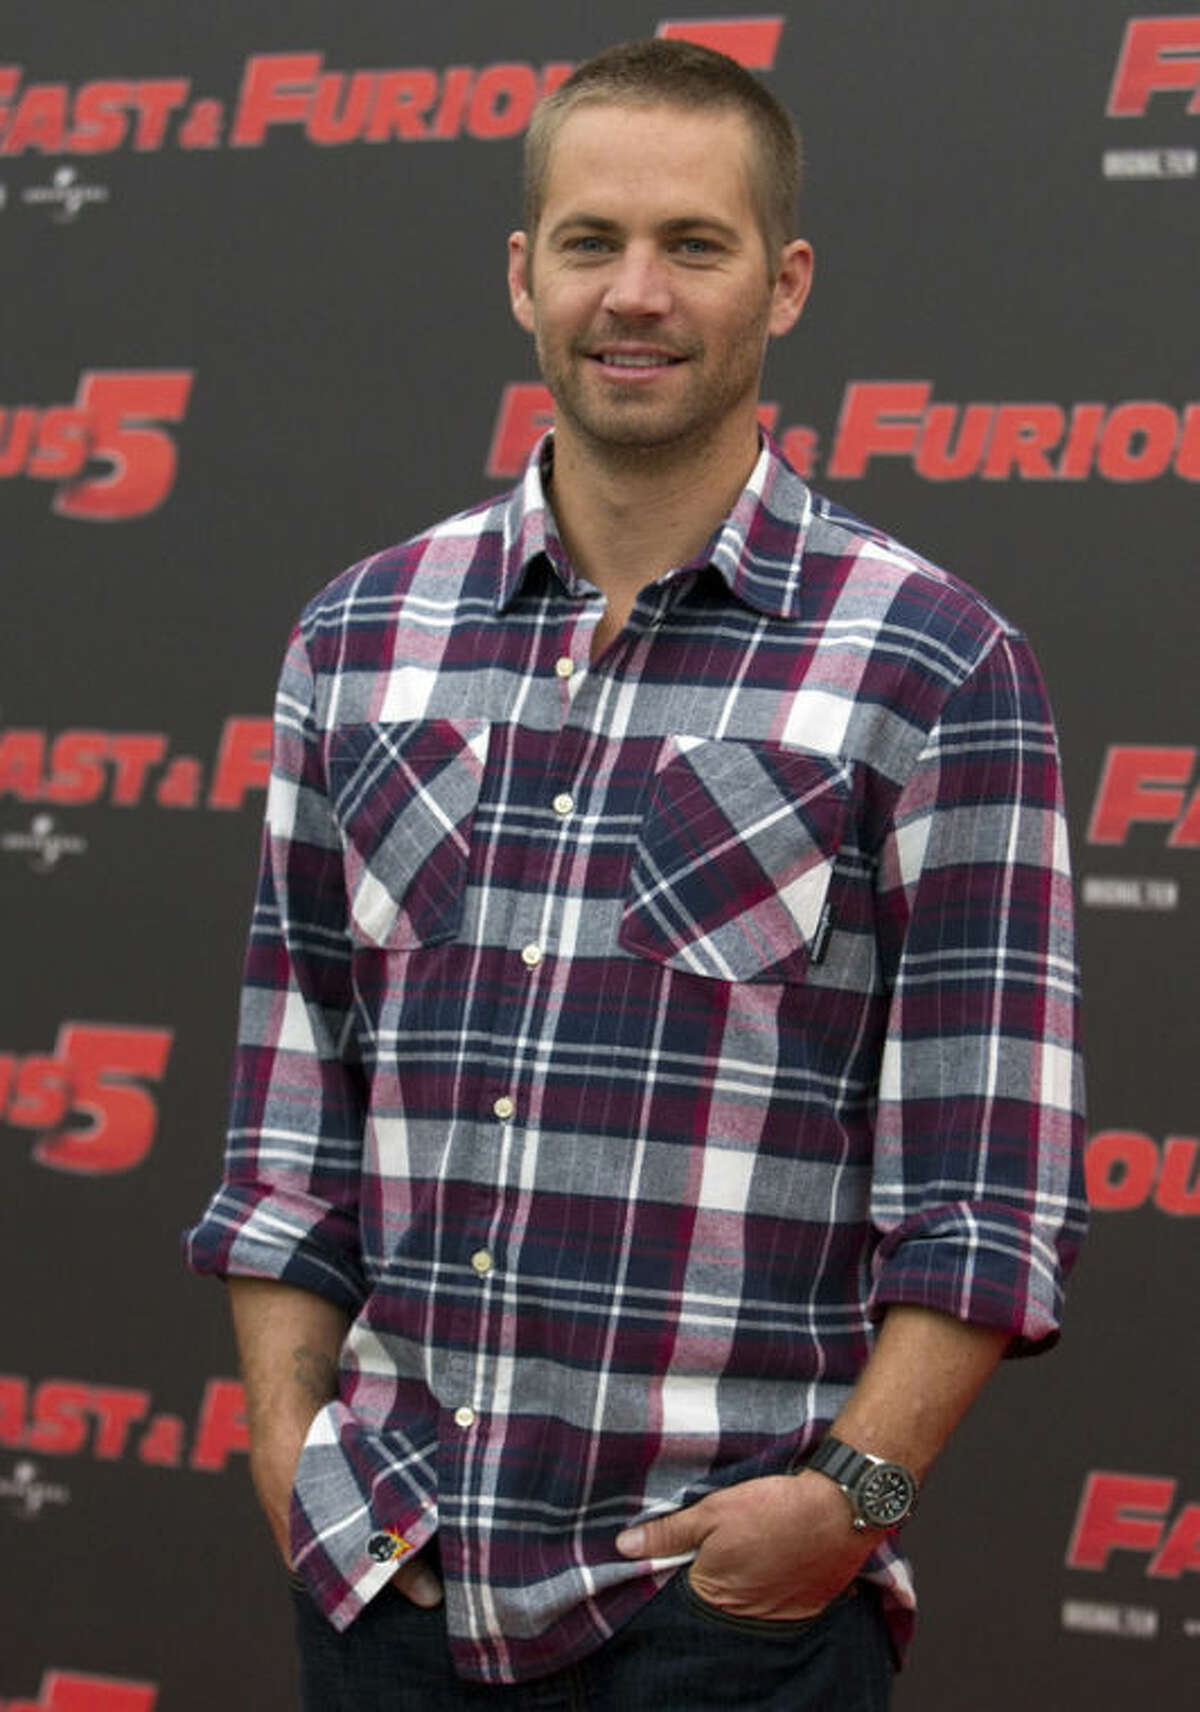 FILE - In this April 29, 2011 file photo, actor Paul Walker poses during the photo call of the movie "Fast and Furious 5," in Rome. The industrial neighborhood where he died in a car crash is known to attract street racers. Walker and his friend and financial adviser Roger Rodas died in the one-car crash Saturday, Nov. 30, 2013, in the Southern California community of Valencia. (AP Photo/Andrew Medichini, File)